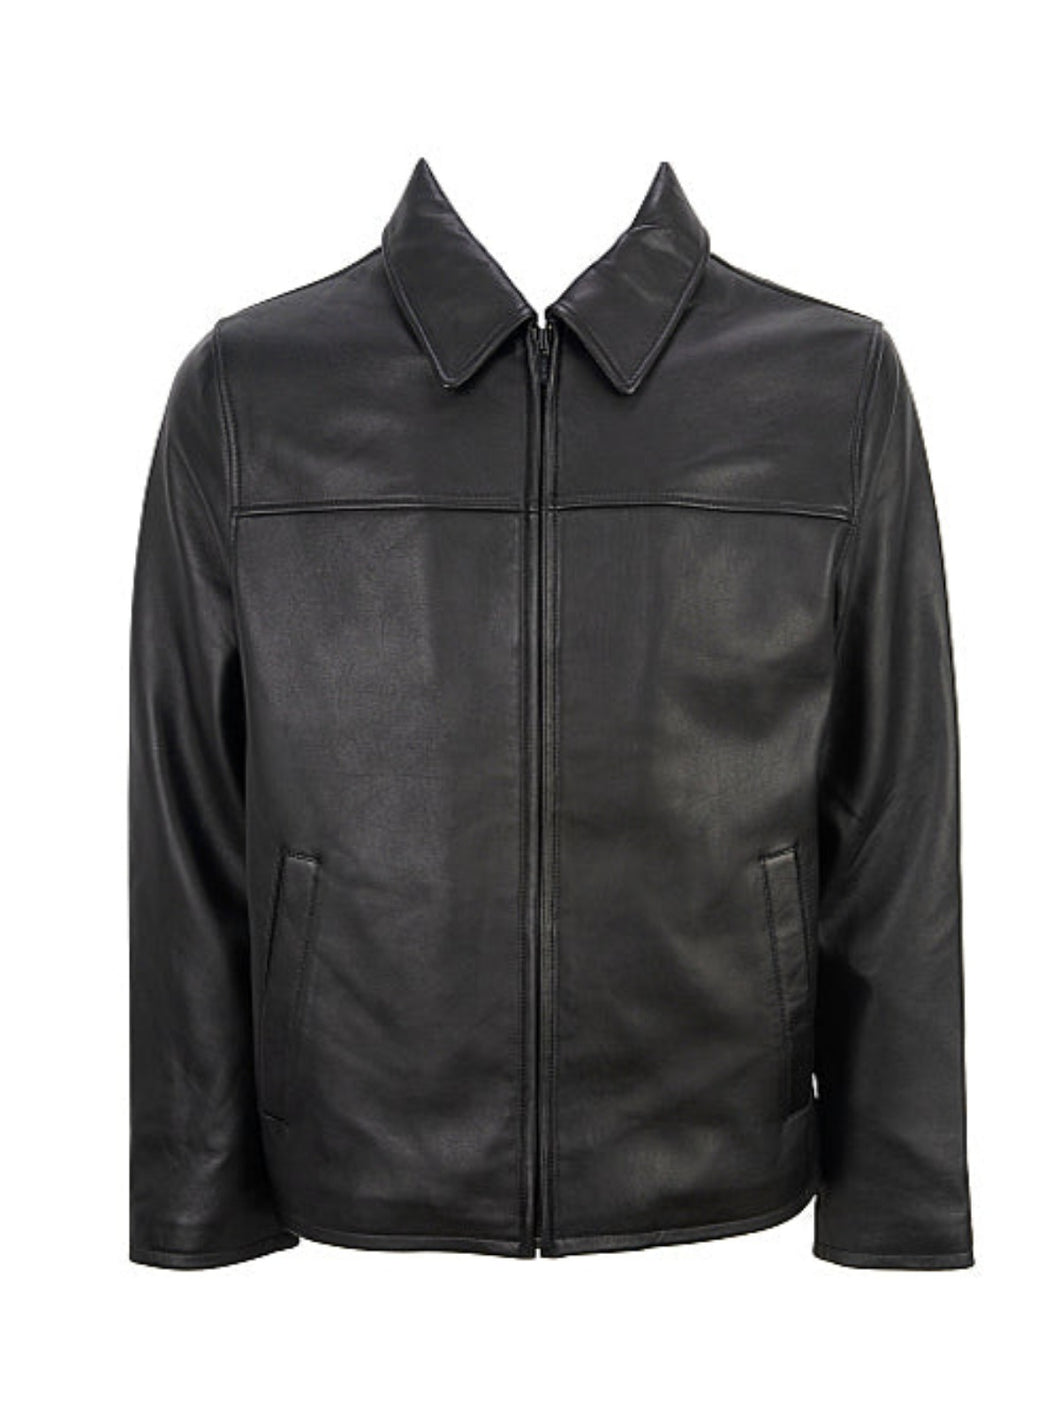 Mens Big and Tall Motorcycle Black Leather Jacket